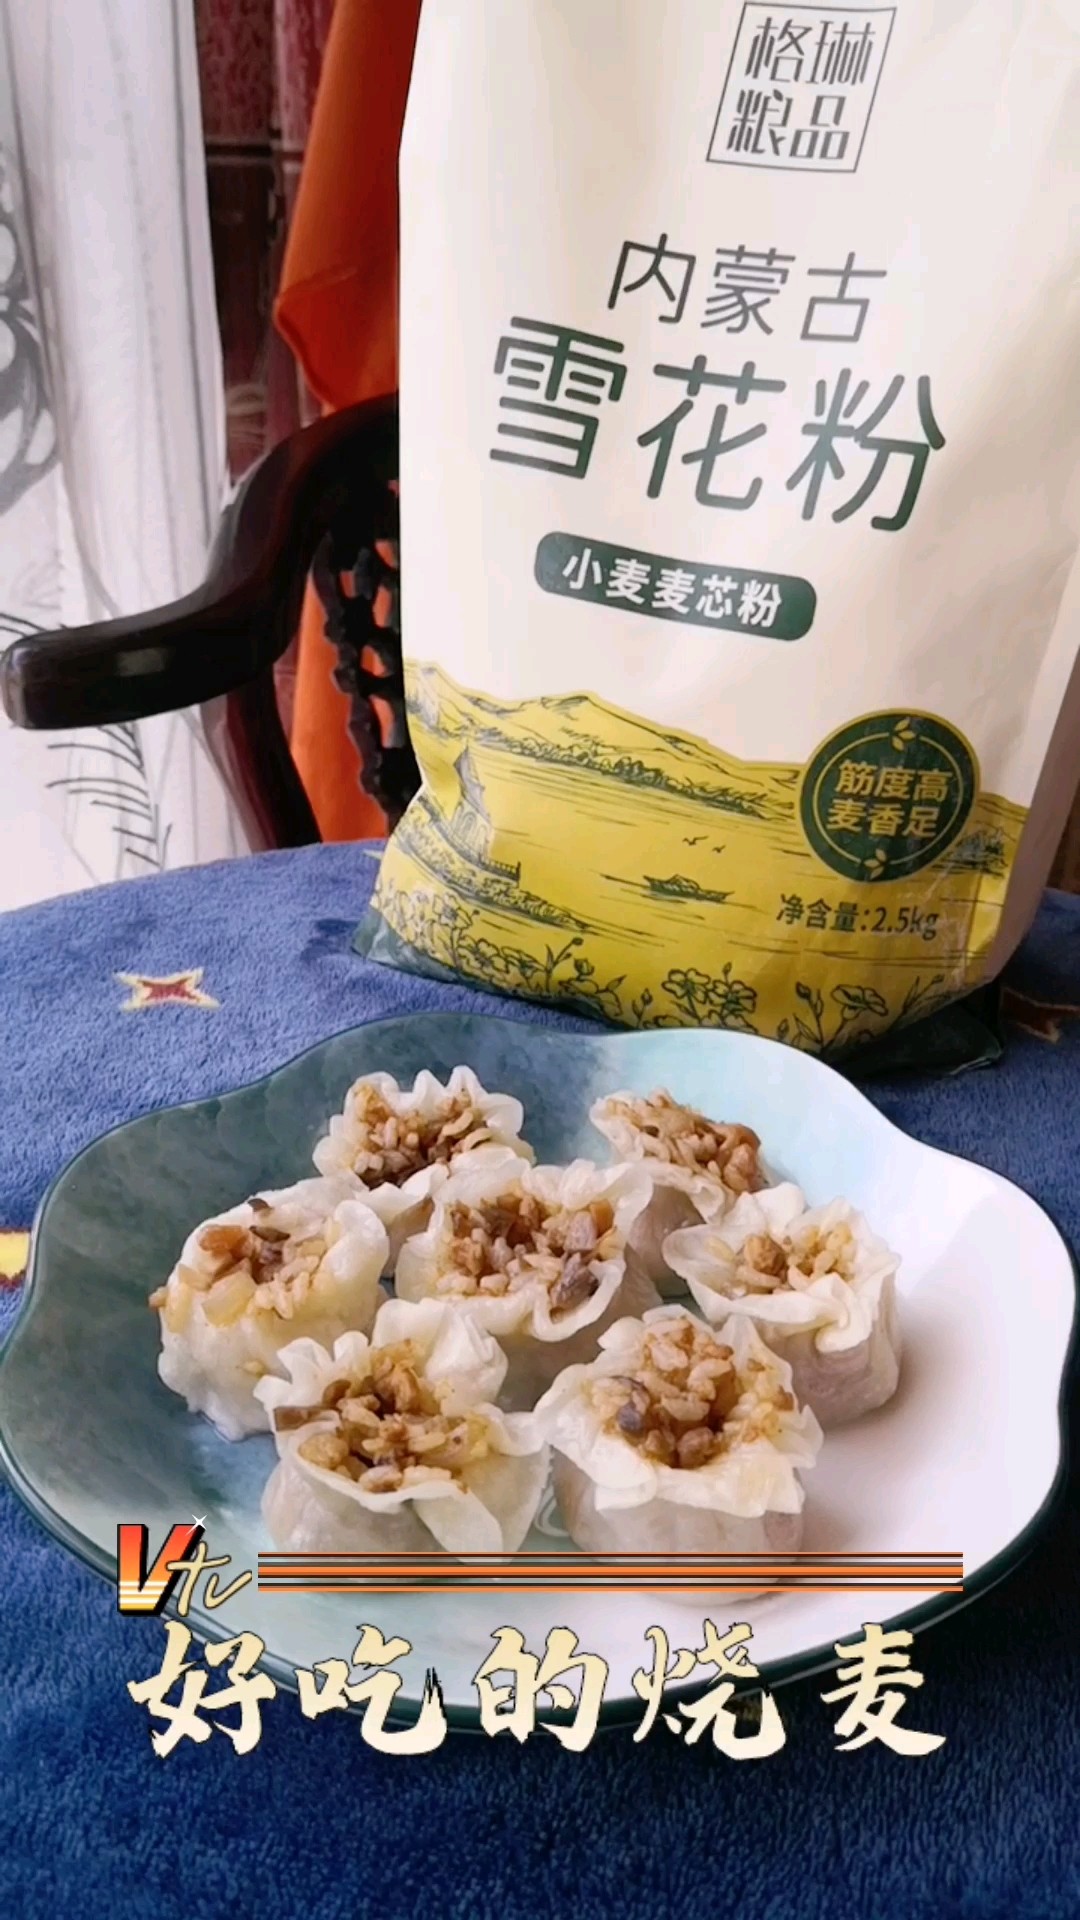 I Don’t Know What to Eat, Come and Make Delicious Siu Mai recipe